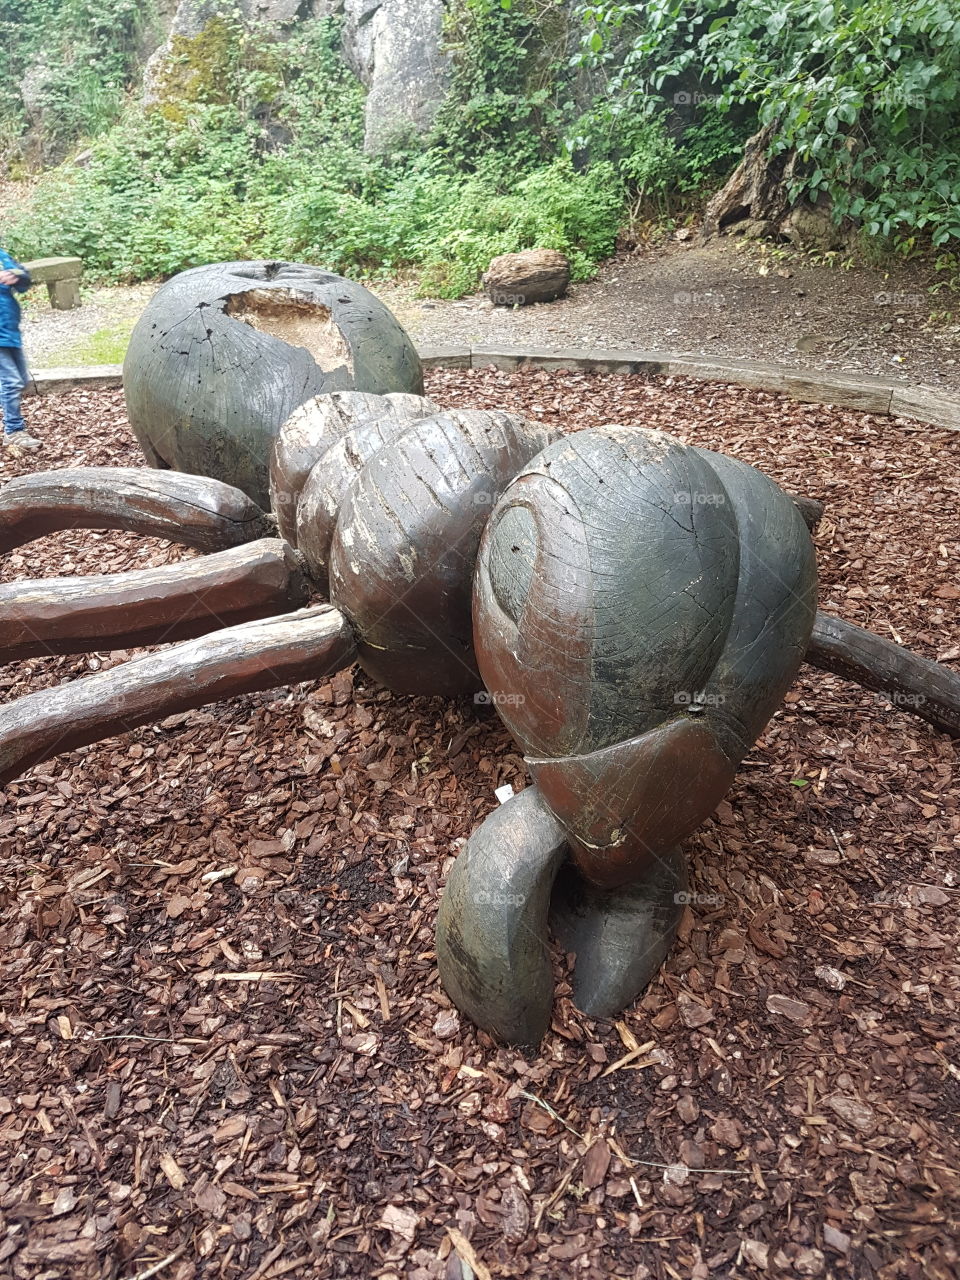 A wooden sculpture of an ant in a forest